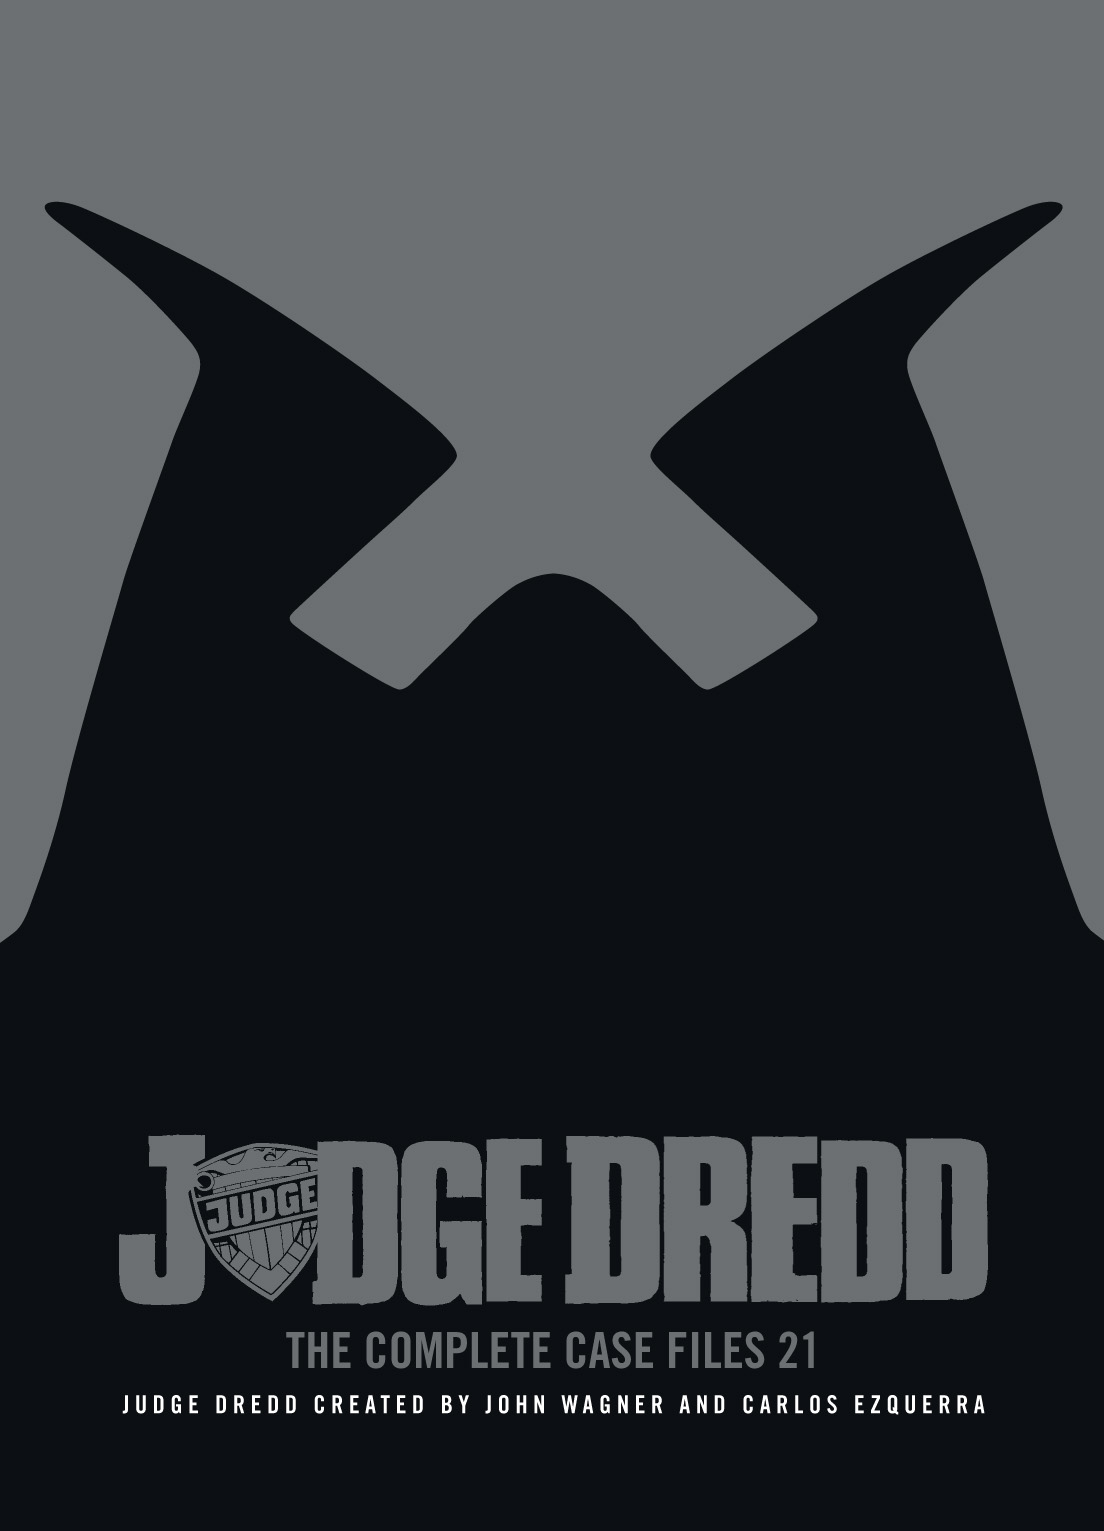 Read online Judge Dredd: The Complete Case Files comic -  Issue # TPB 21 - 3